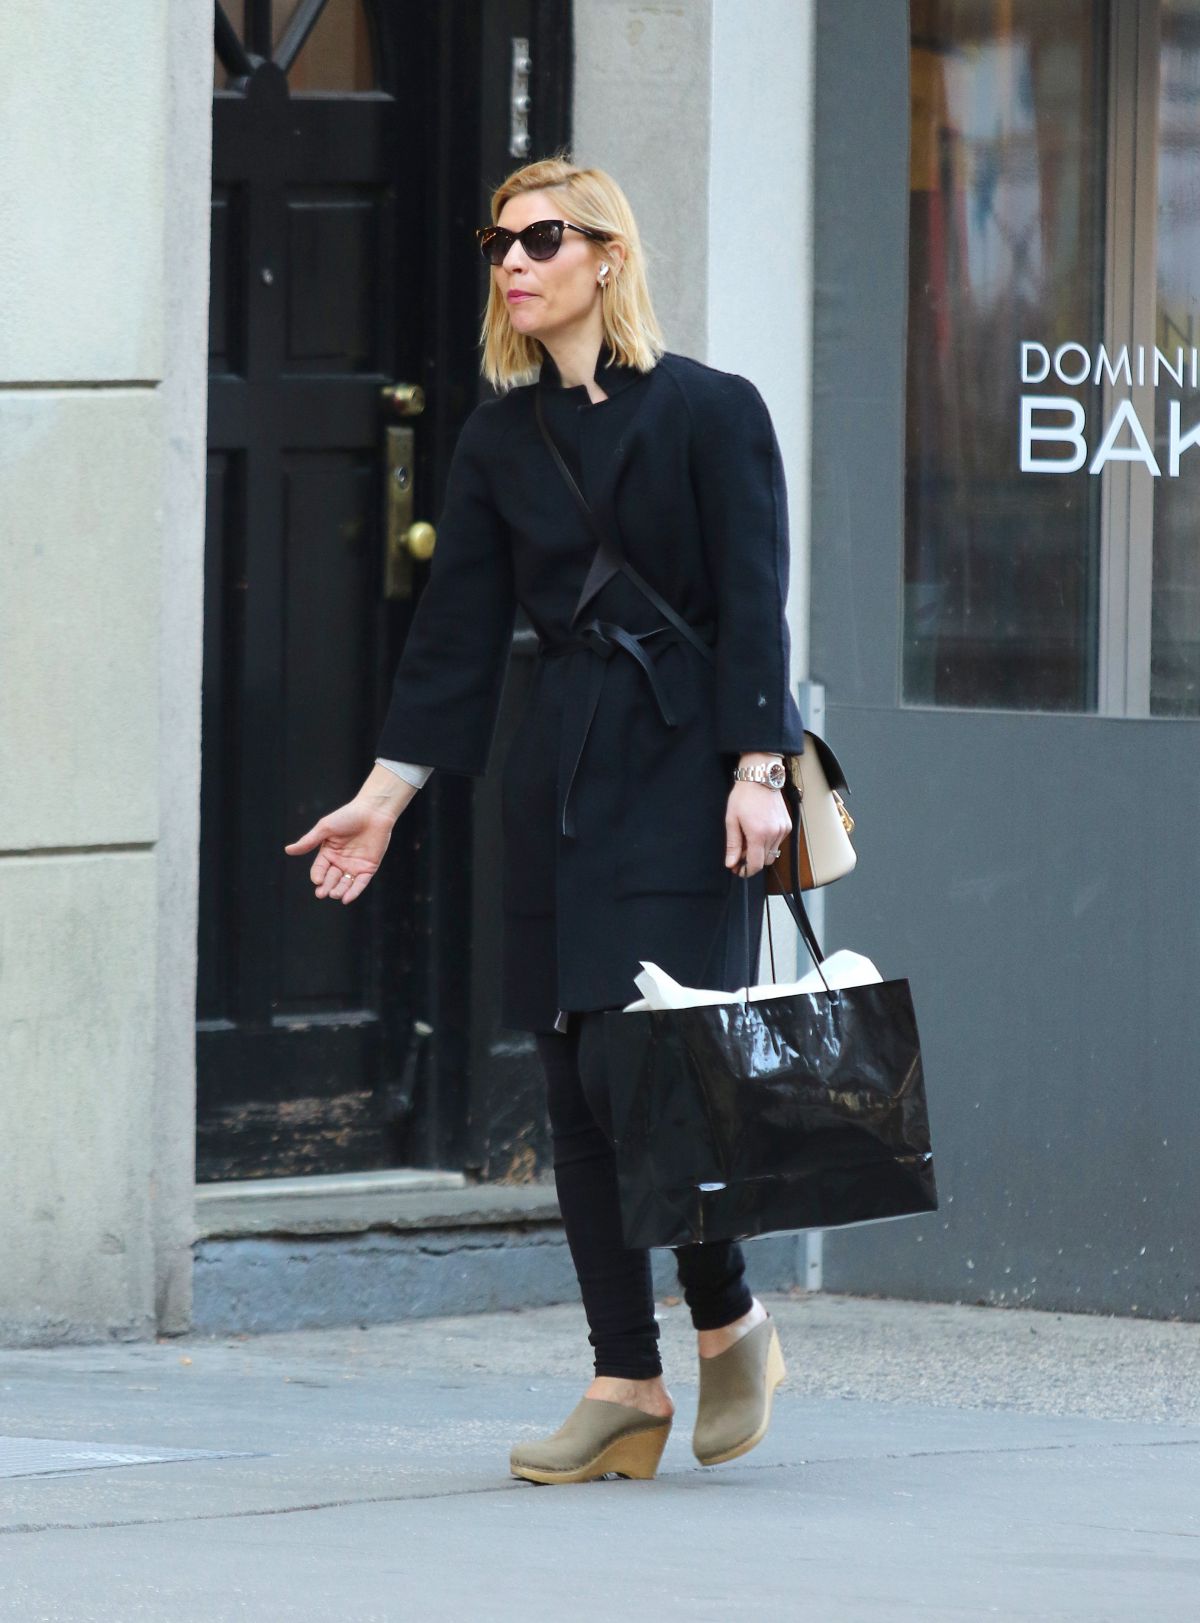 CLAIRE DANES Out Shopping in New York 03/10/2020 – HawtCelebs